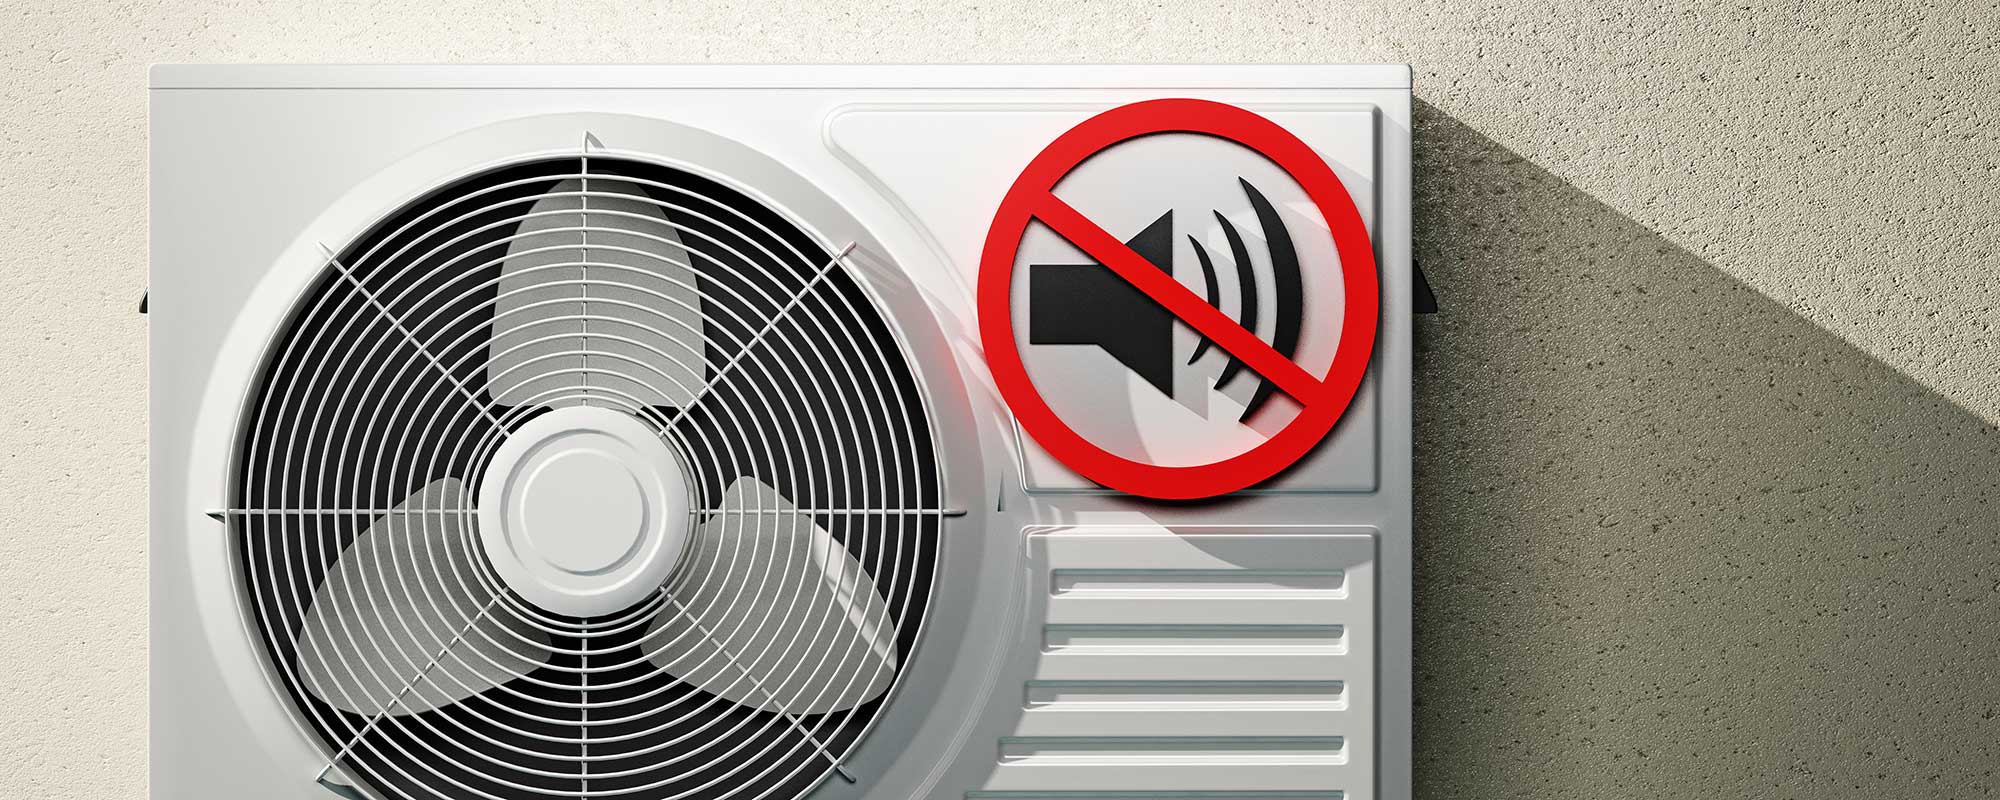 Tips-to-Reduce-AC-Noise